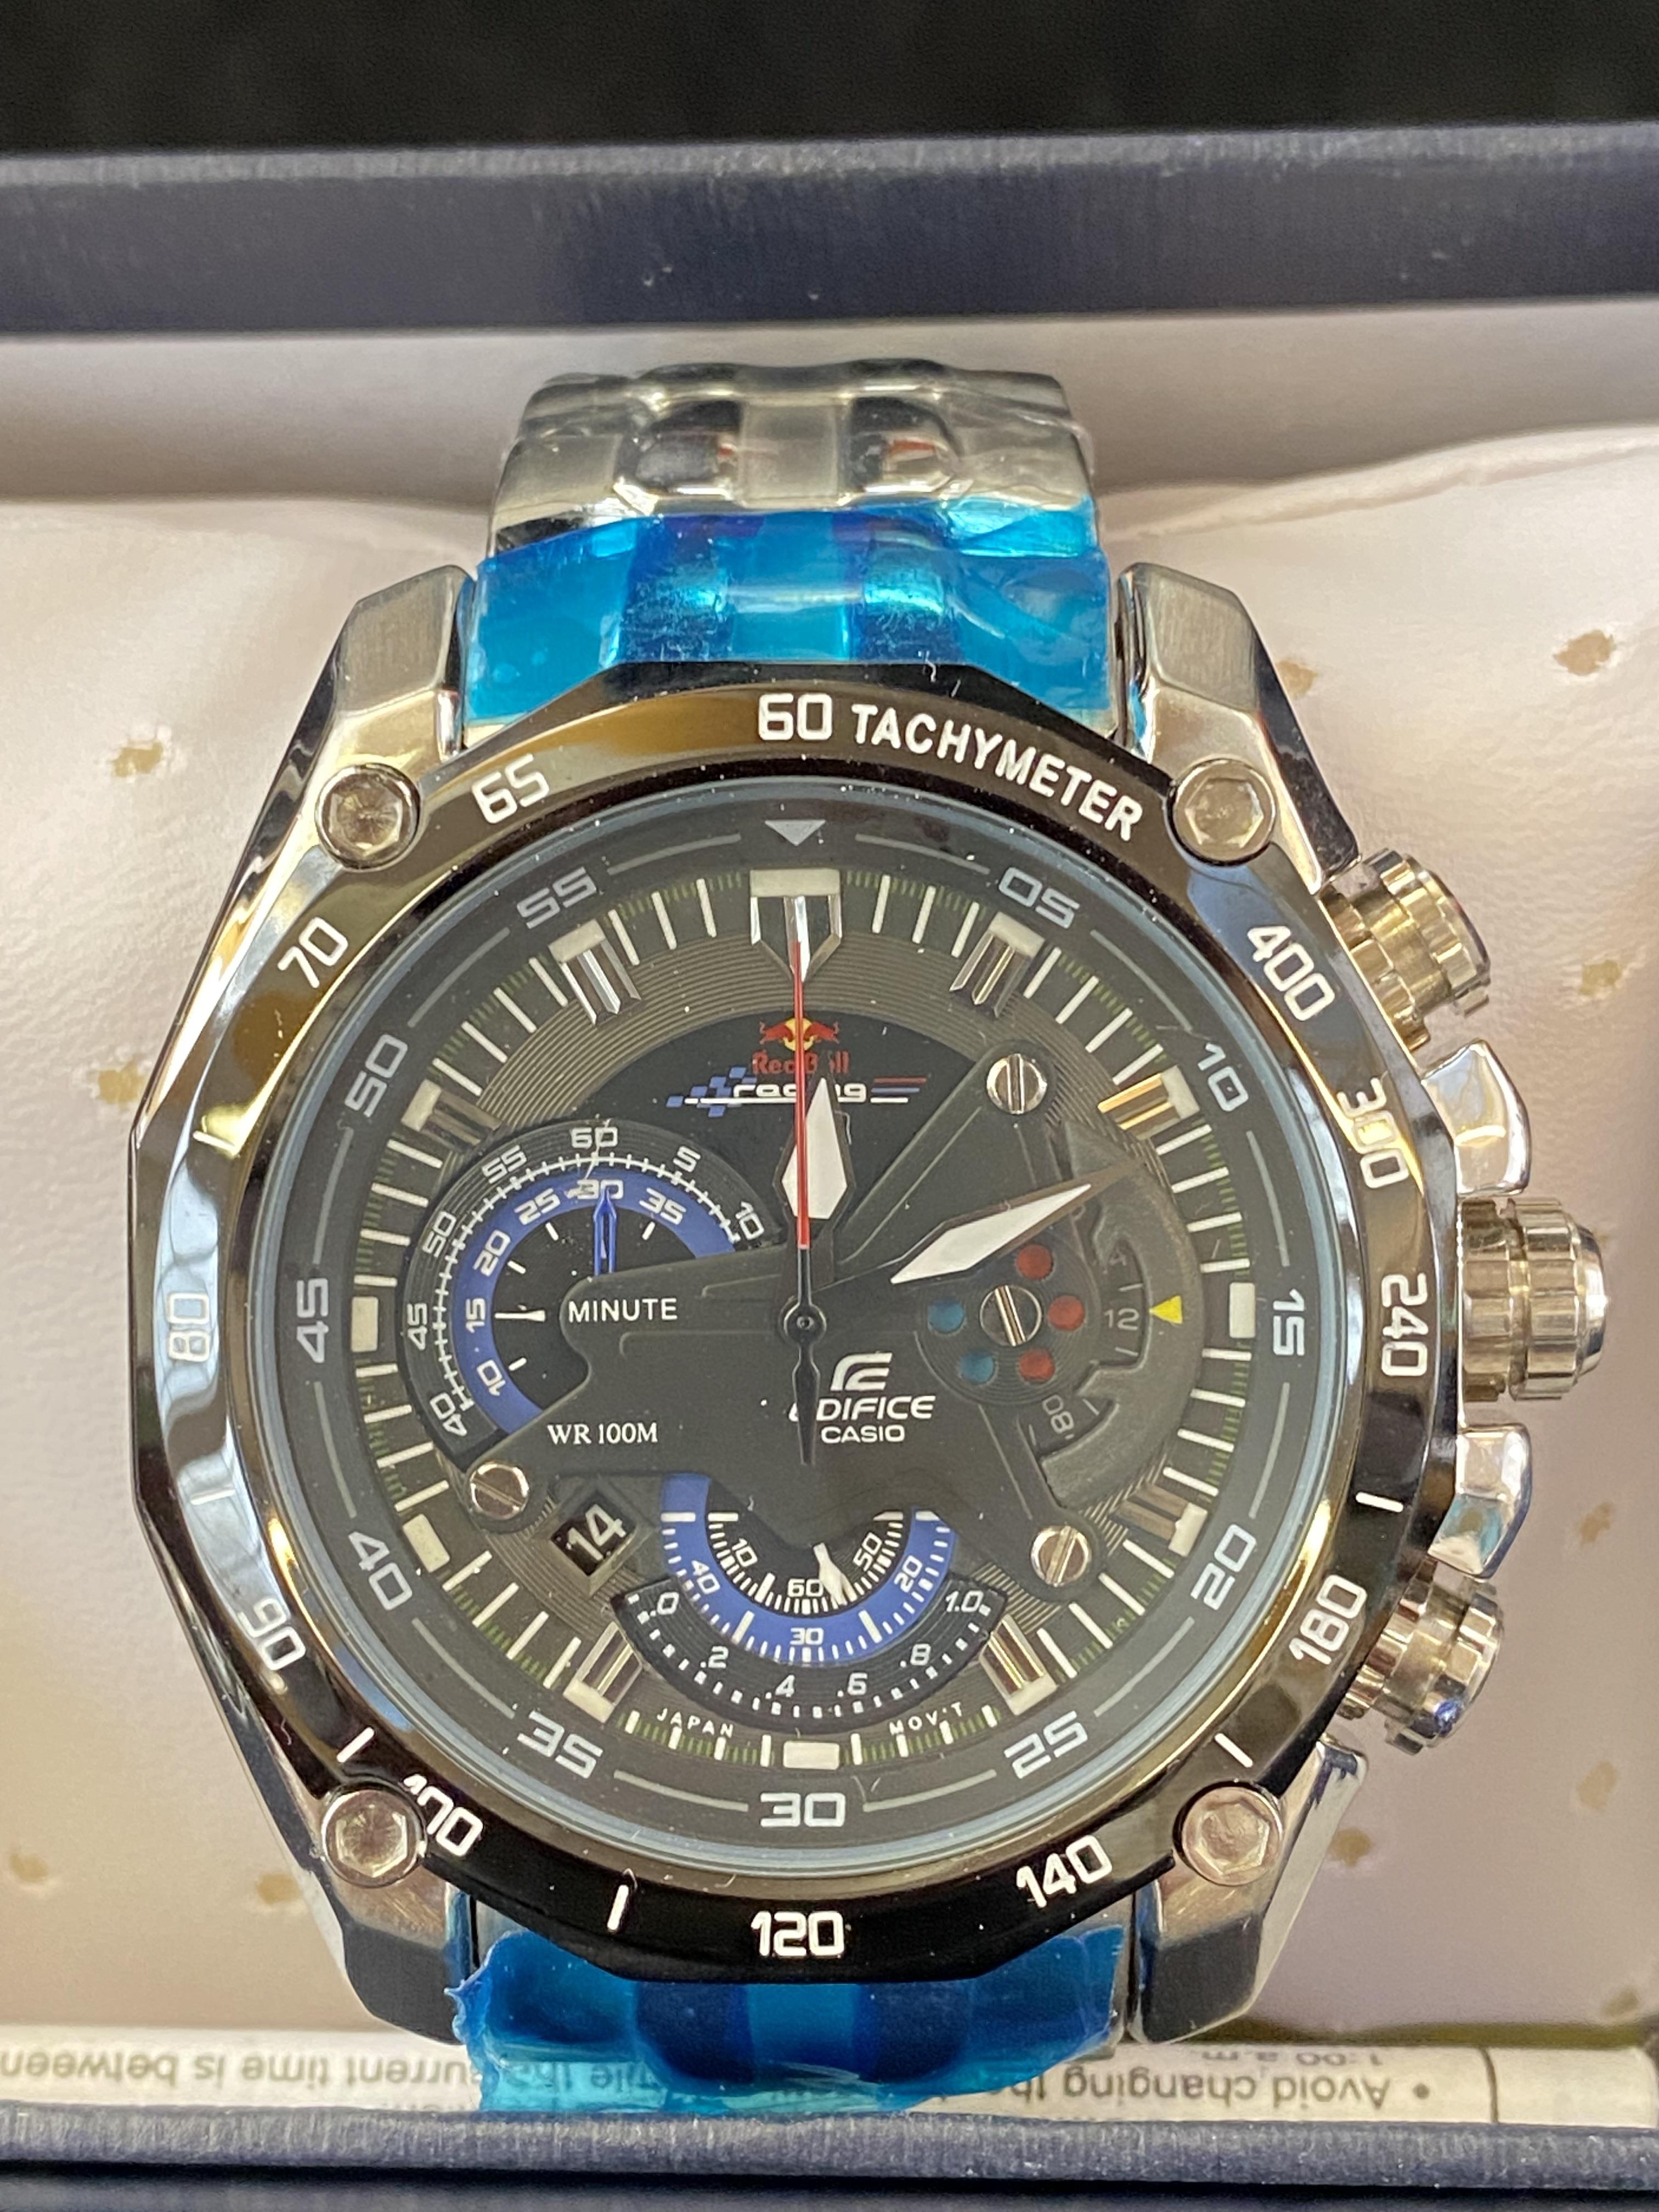 Edifice Casio chronograph wristwatch boxed as new